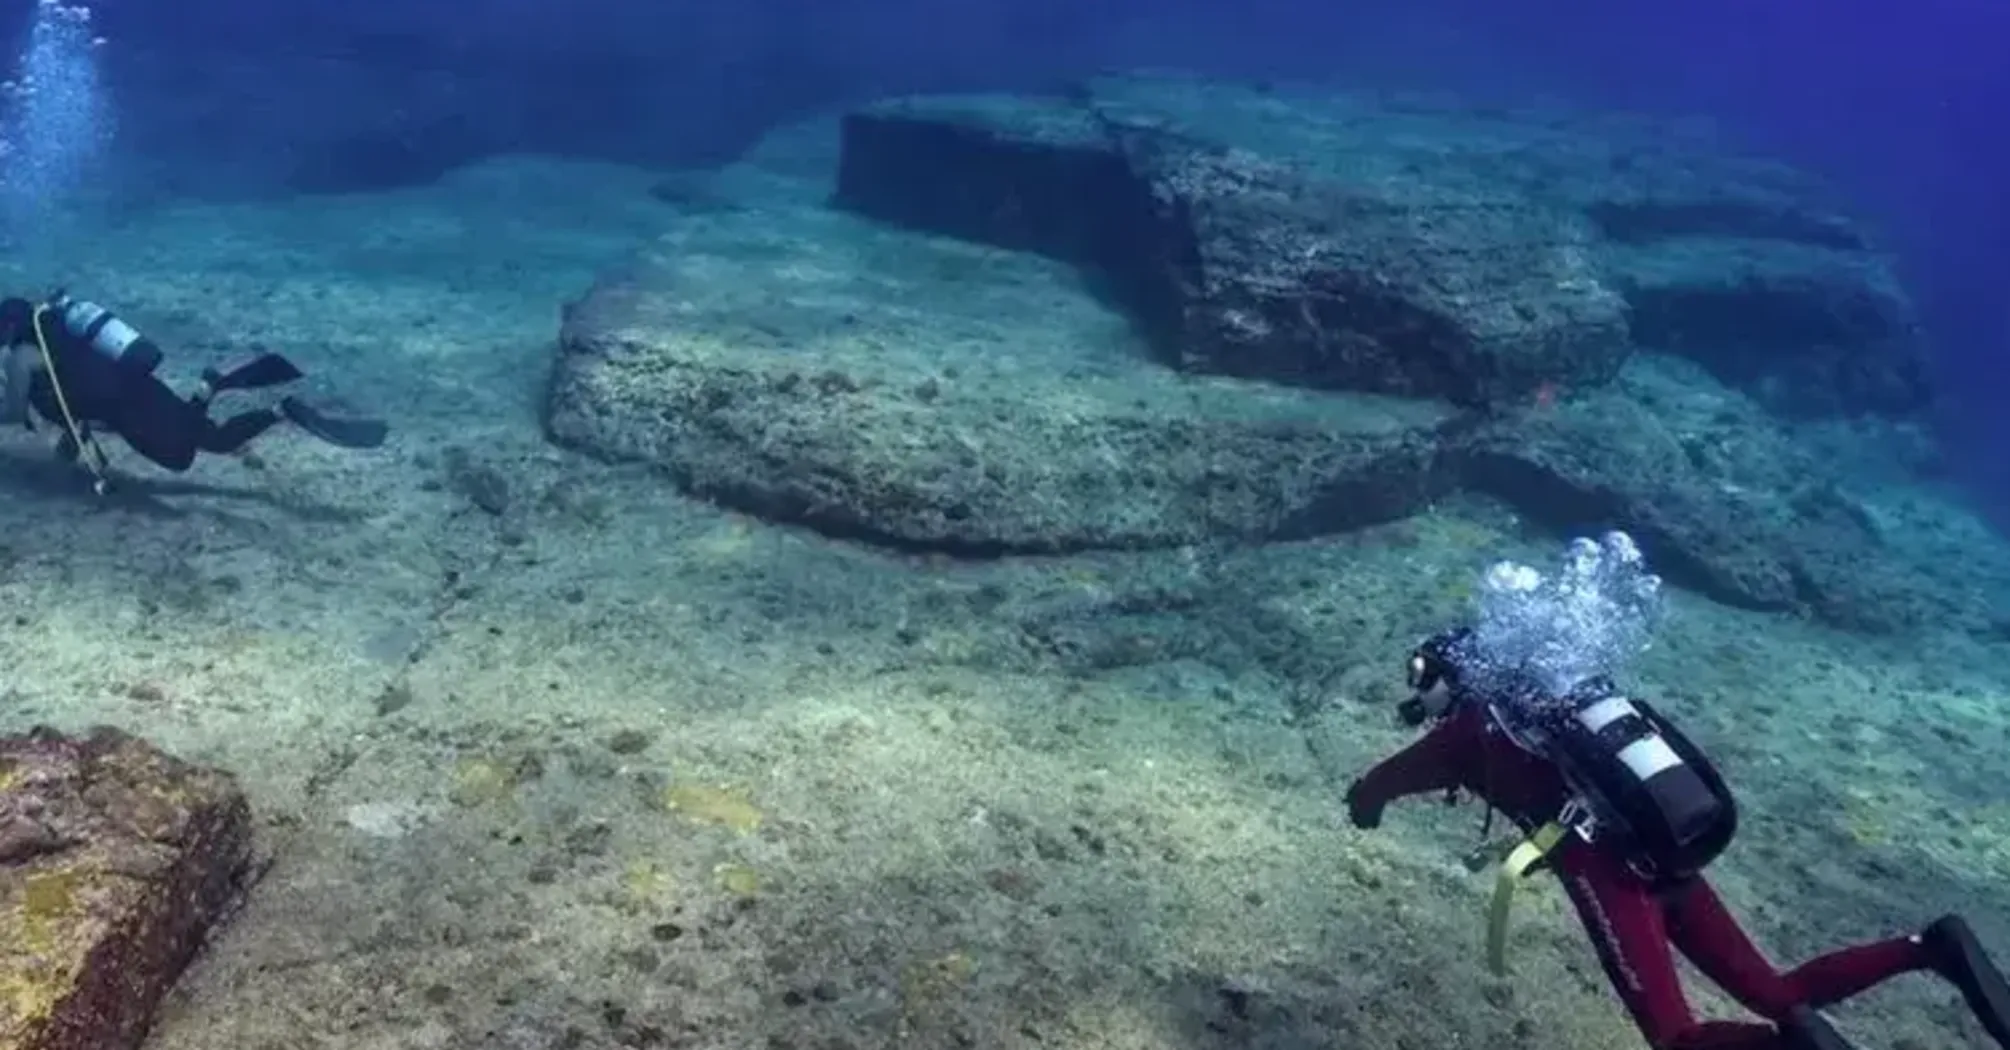 Ancient city under the sea: scientists discover 'Japanese Atlantis' with pyramids and hieroglyphics (photo)